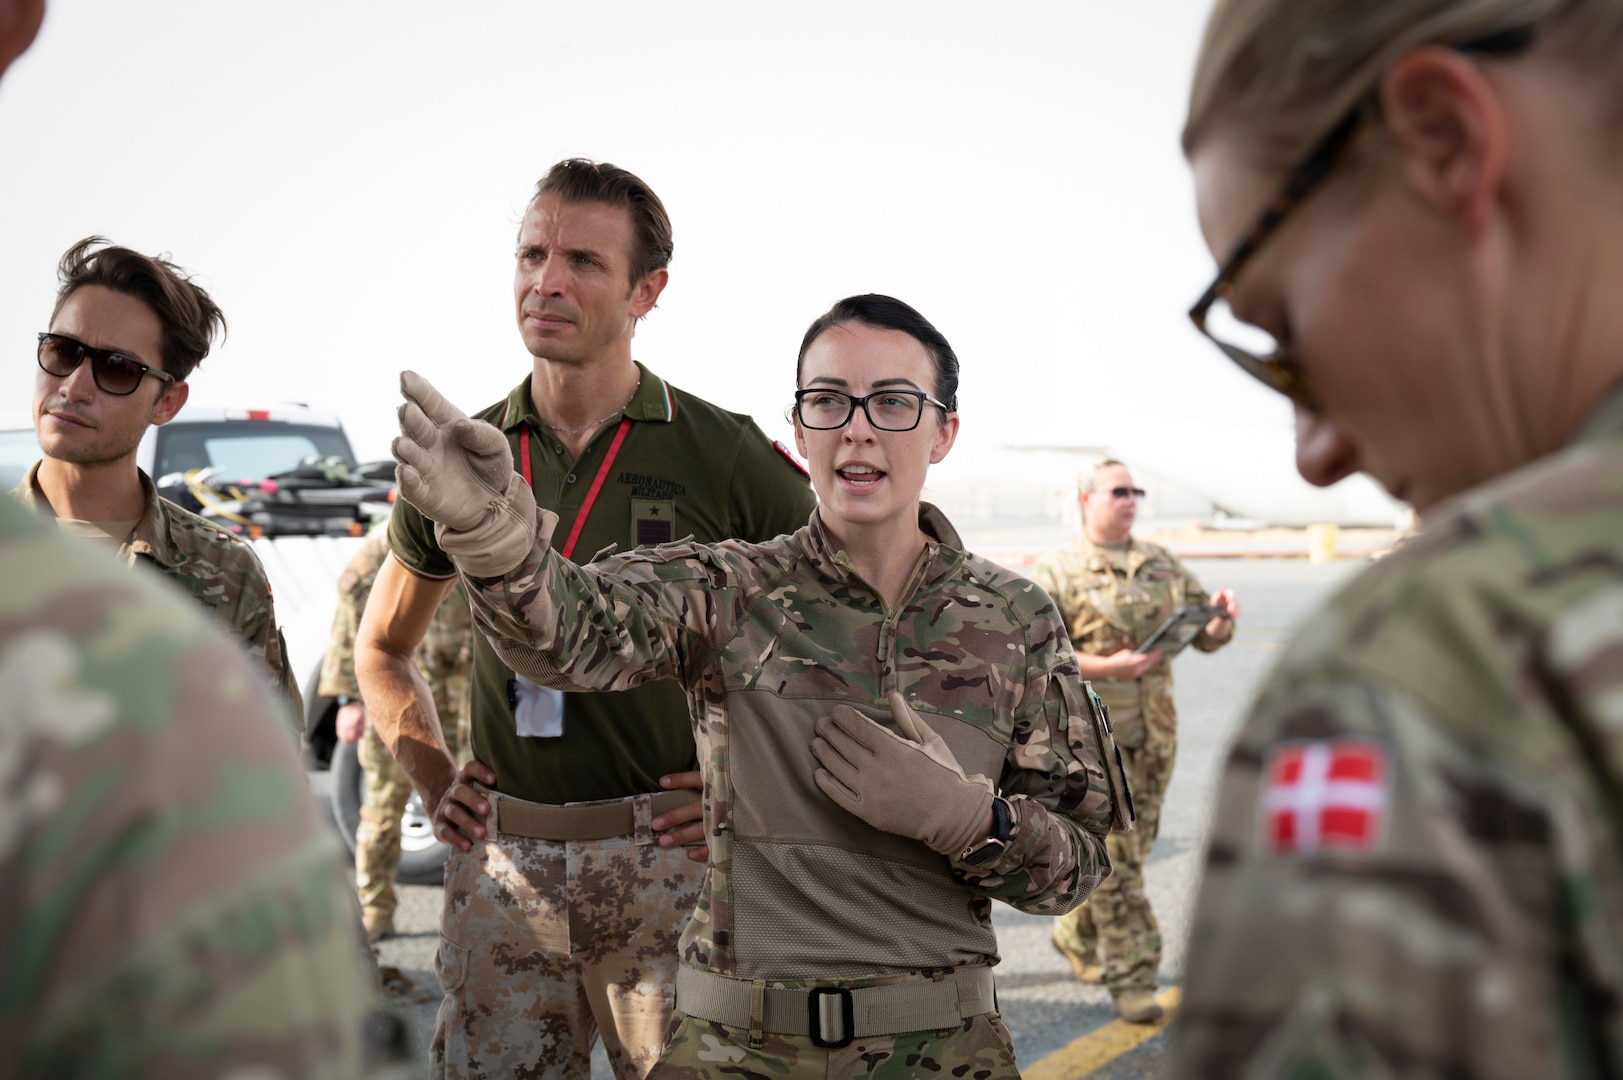 U.S. Air Force Maj. Amanda Peterson, 405th Expeditionary Aeromedical Evacuation Squadron flight nurse, briefs Danish, Italian and Canadian coalition partners on how to configure and transport patients on U.S. Air Force aircraft at the flightline on Ali Al Salem Air Base, Kuwait, July 29, 2022. Coalition partners were able to learn and share tactics and techniques with each other so in an emergency response situation, the 405th EAES and  coalition partners would be able to operate with the strength and coordination of one team. This image was altered to remove a security item. (U.S. Air Force photo by Staff Sgt. Dalton Williams)